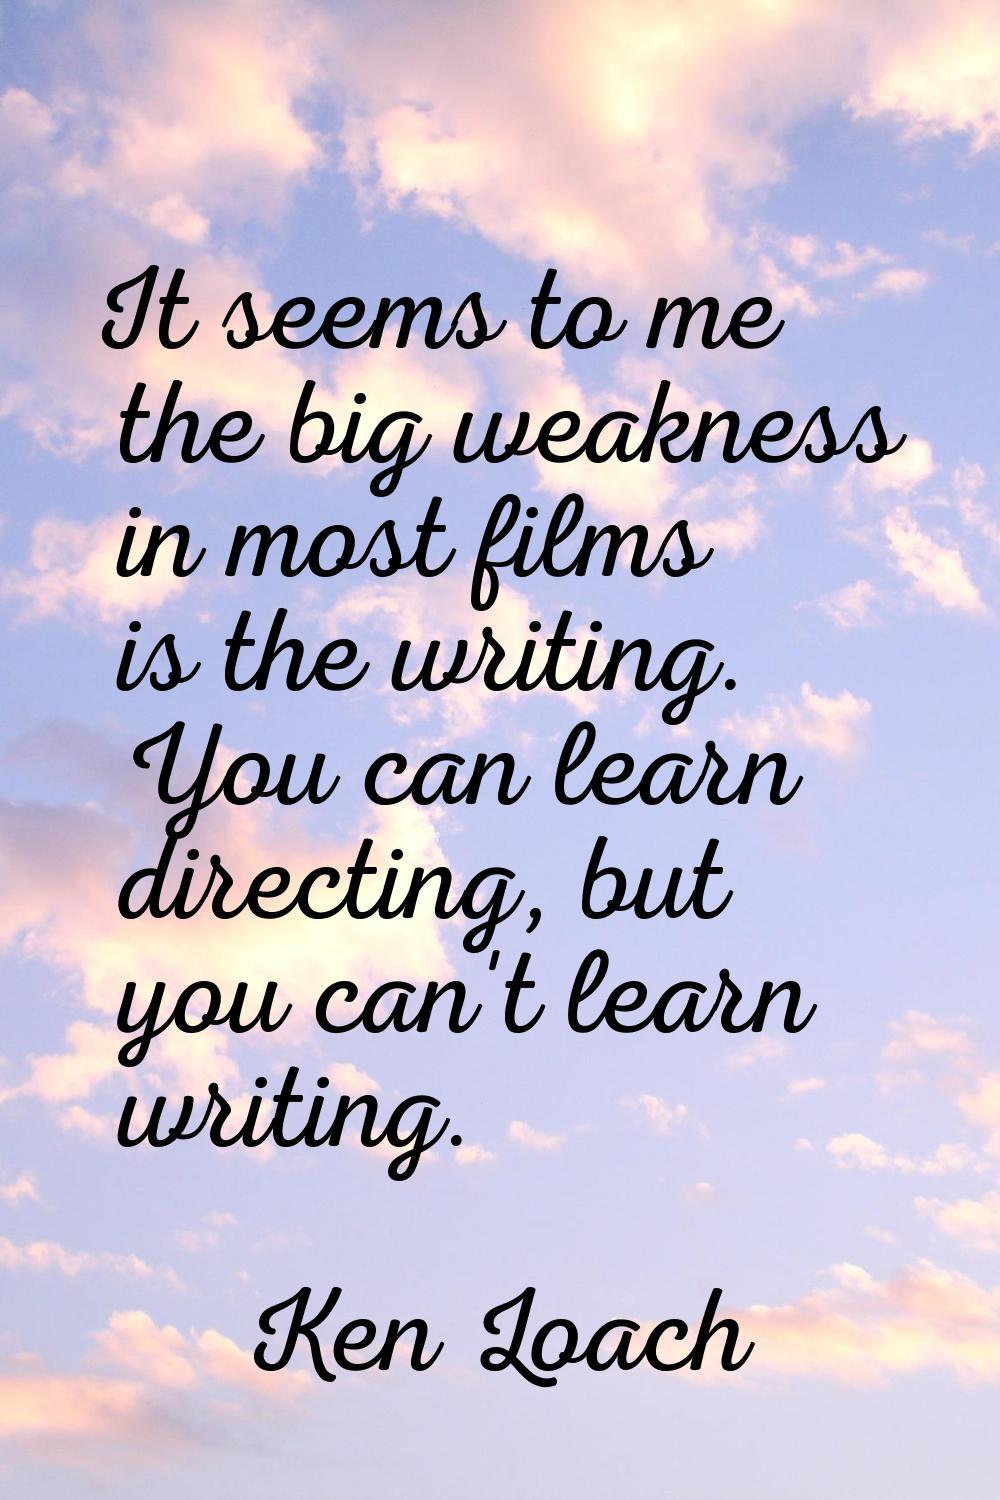 It seems to me the big weakness in most films is the writing. You can learn directing, but you can'